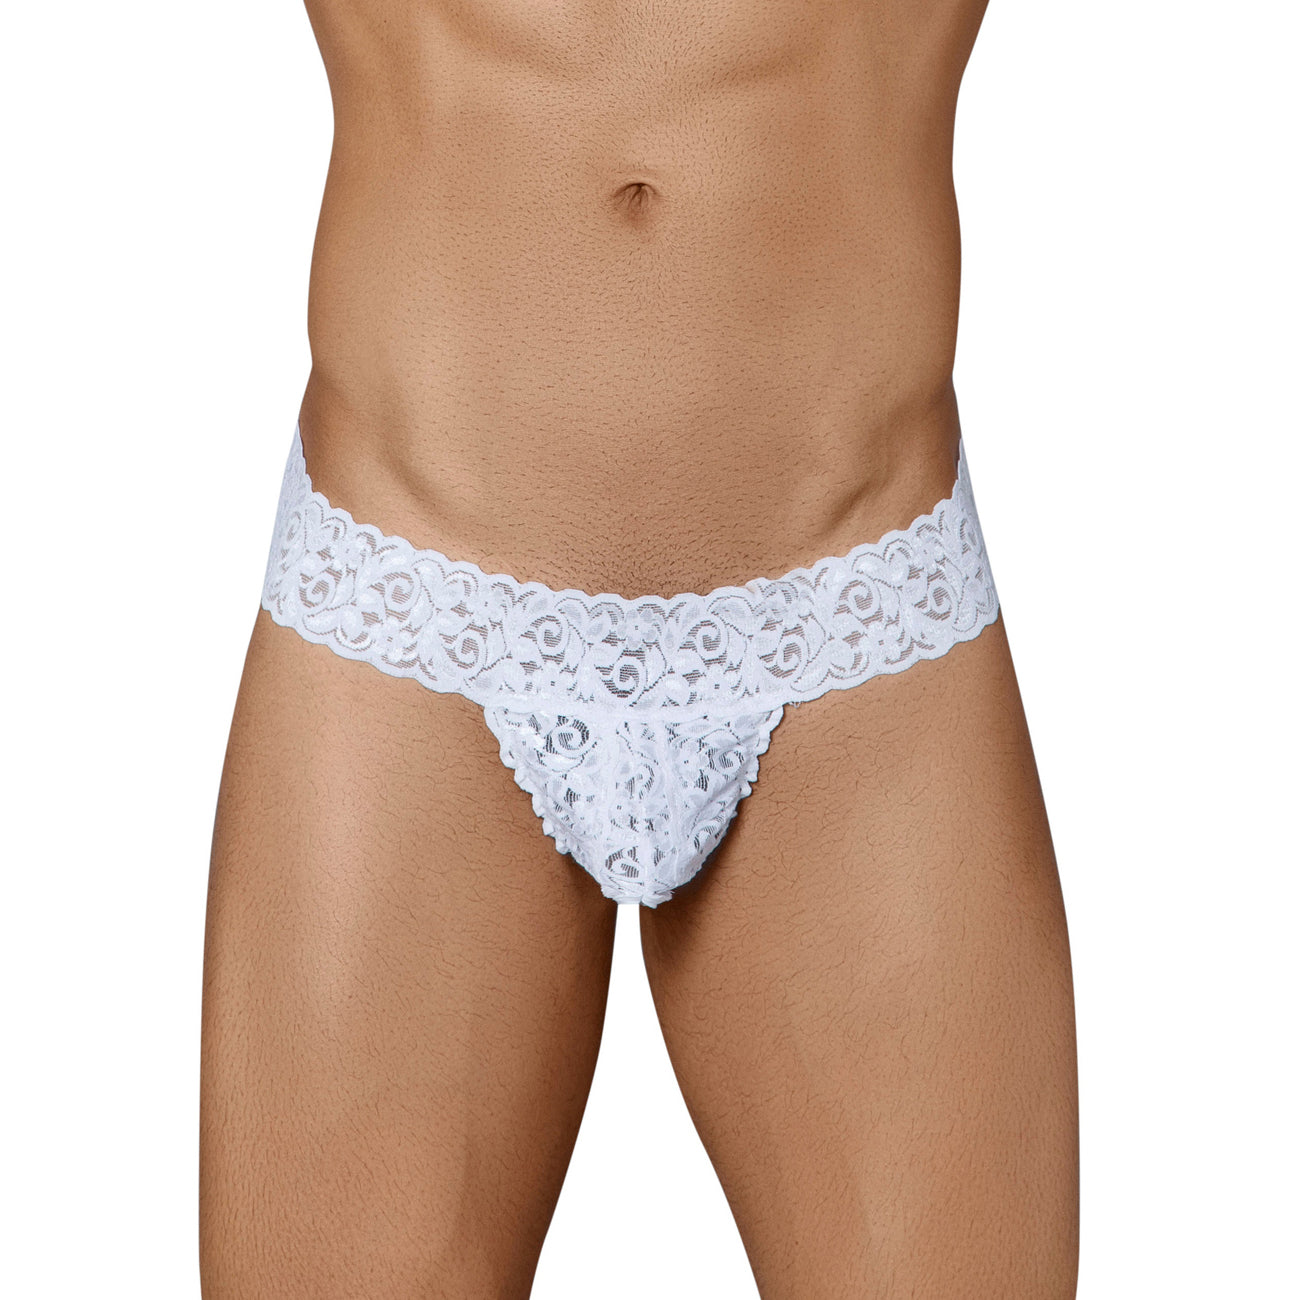 Soft sexy lace thongs for men For Comfort 